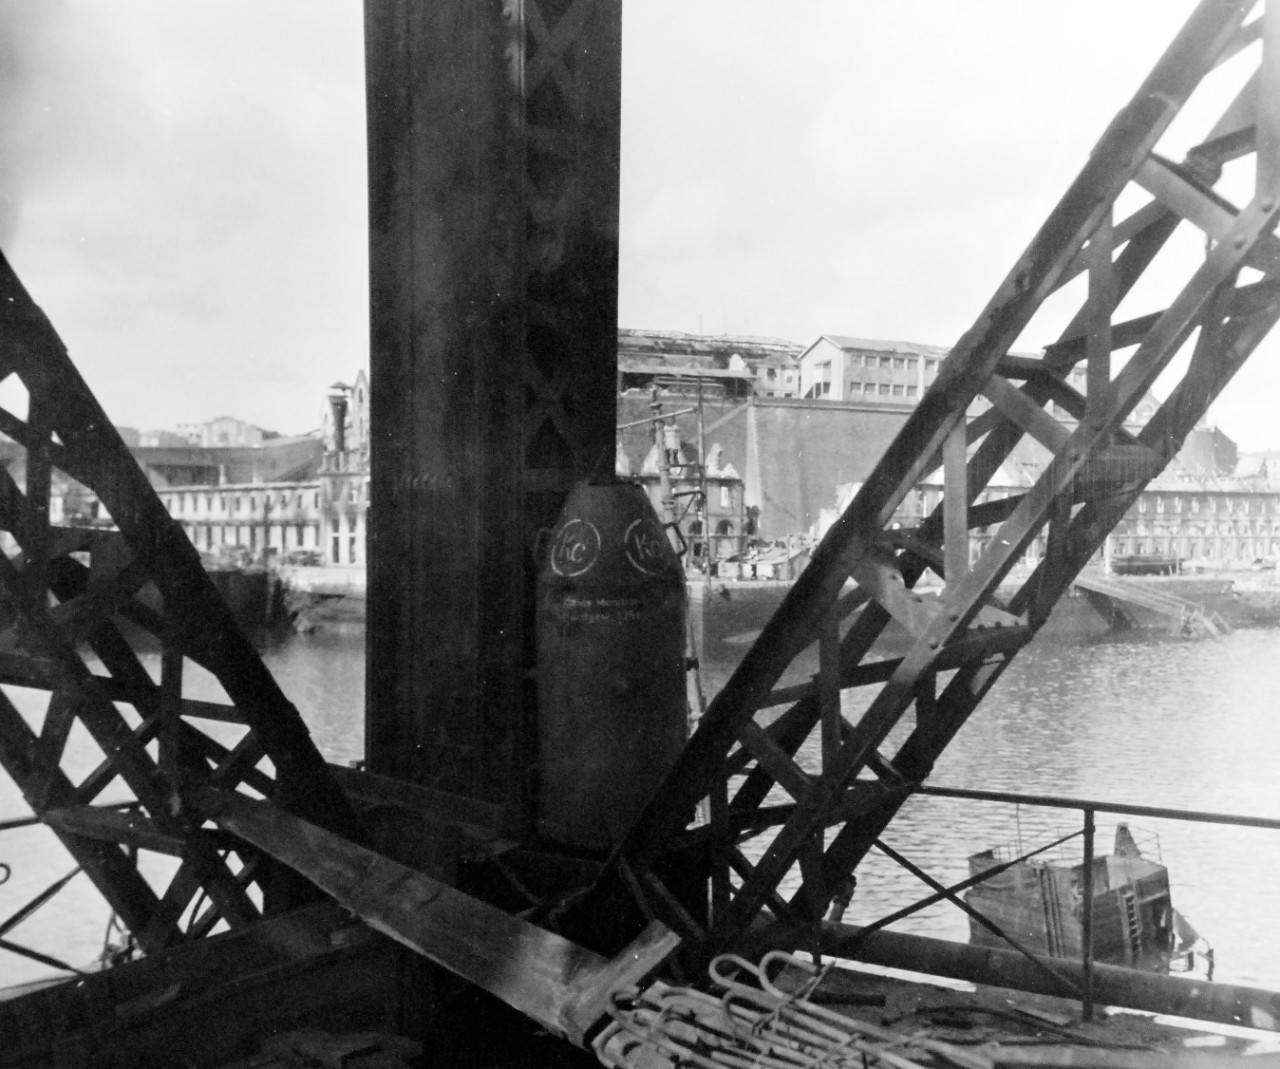 80-G-257428:  Invasion of Southern France, Brest, August-September 1944.   A German mine placed in the leg of 150 ton crane on the waterfront at Brest, France, apparently the garrison surrendered before it had time to detonate it.  Wreckage in background from allied bombing, 27 September 1944.  Official U.S. Navy Photograph, now in the collections of the National Archives.   (2014/10/28).